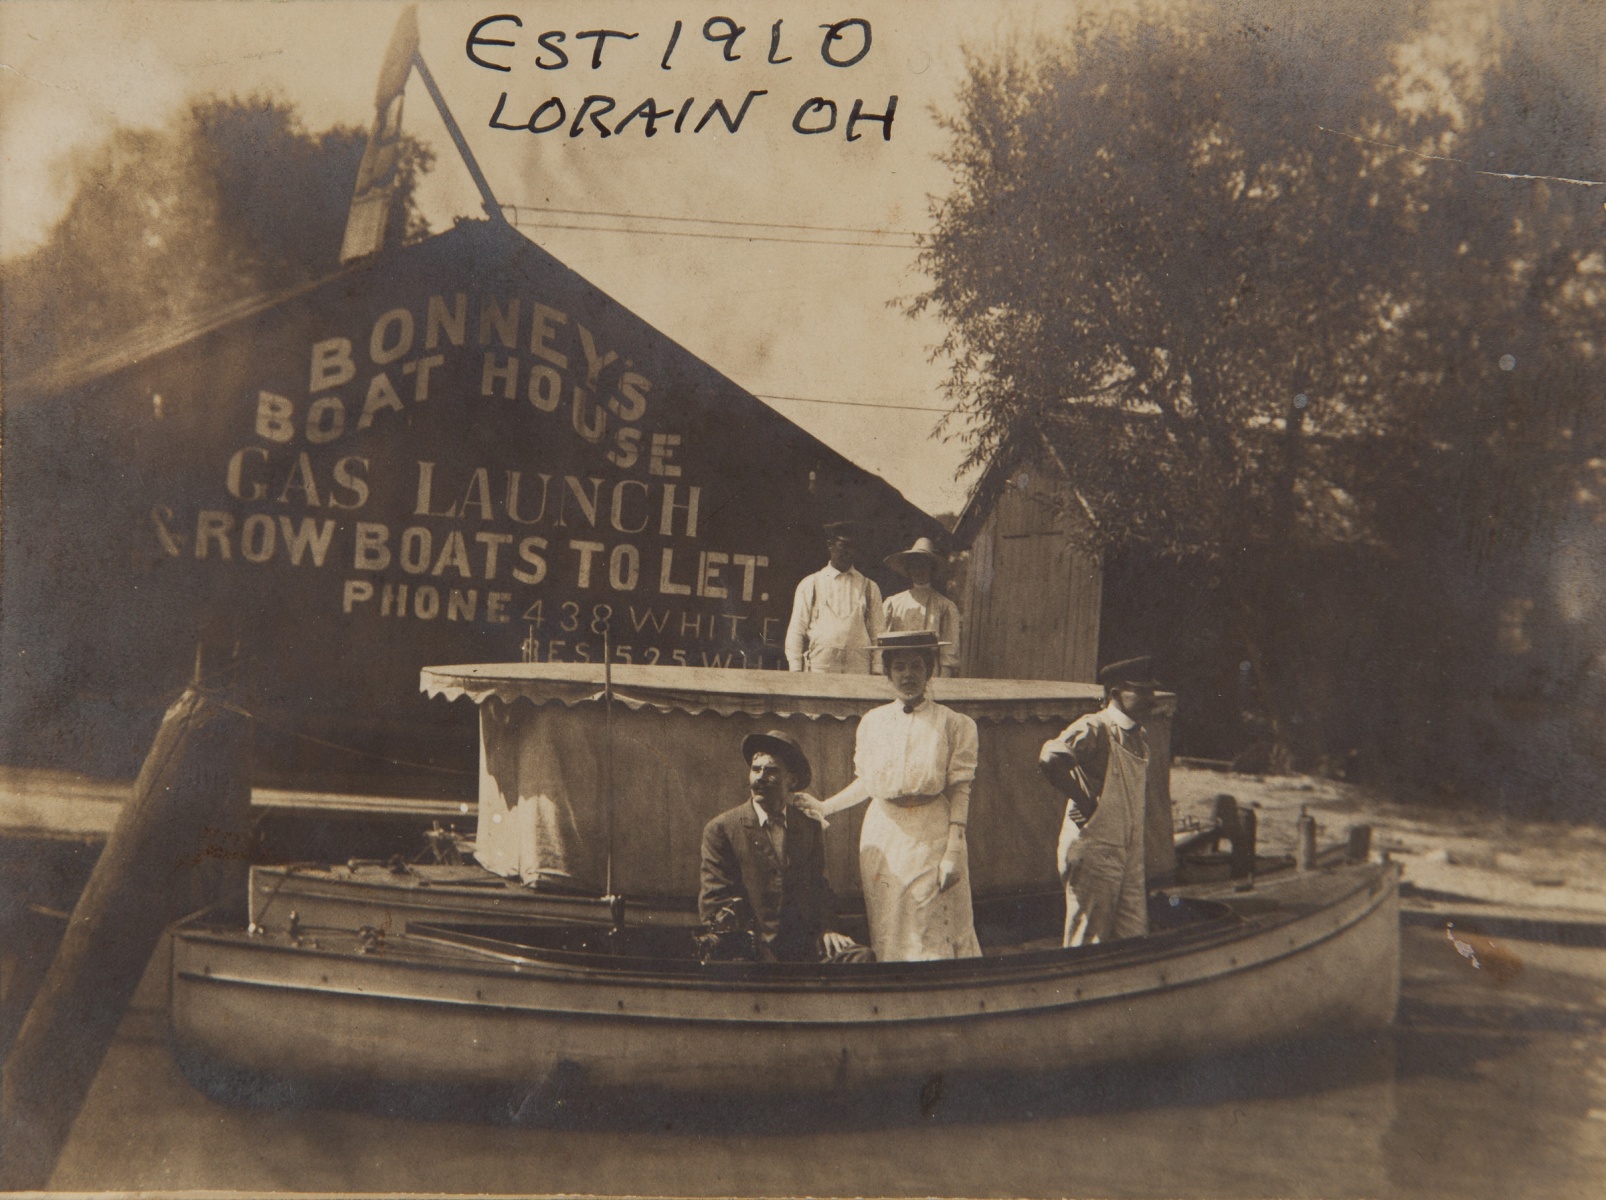 1910, "Est 1910, Lorain OH", On building: "BONNEY'S BOAT HOUSE, GAS LAUNCH, ROW BOATS TO LET, PHONE 438 White, E5525 ?"